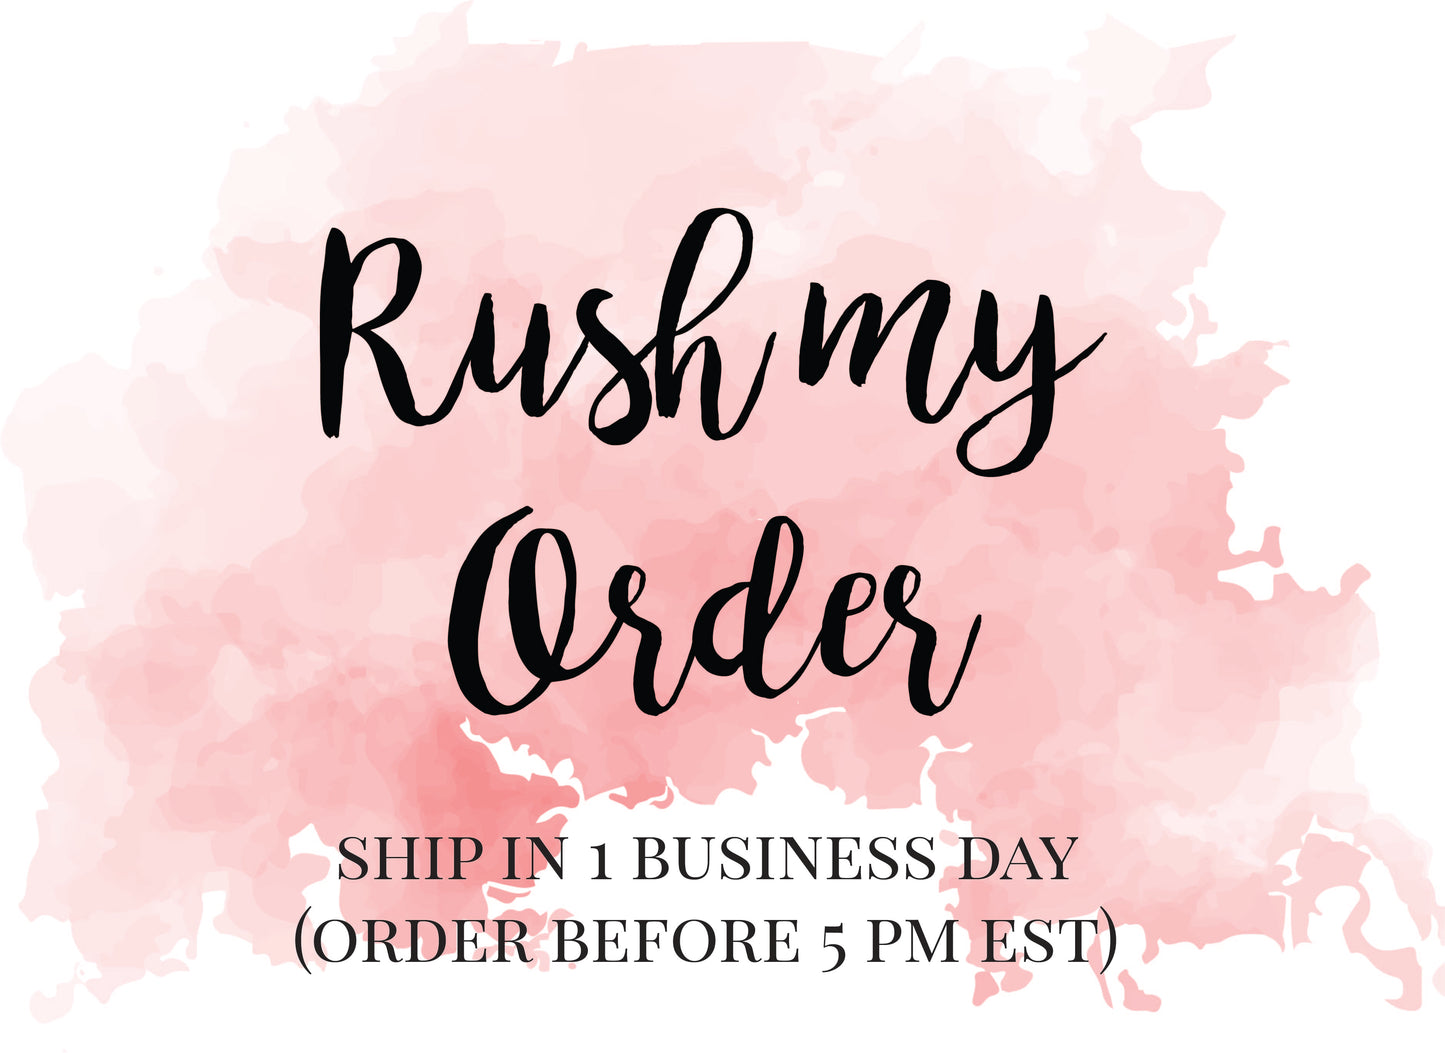 RUSH ORDER FOR WOOD SIGN